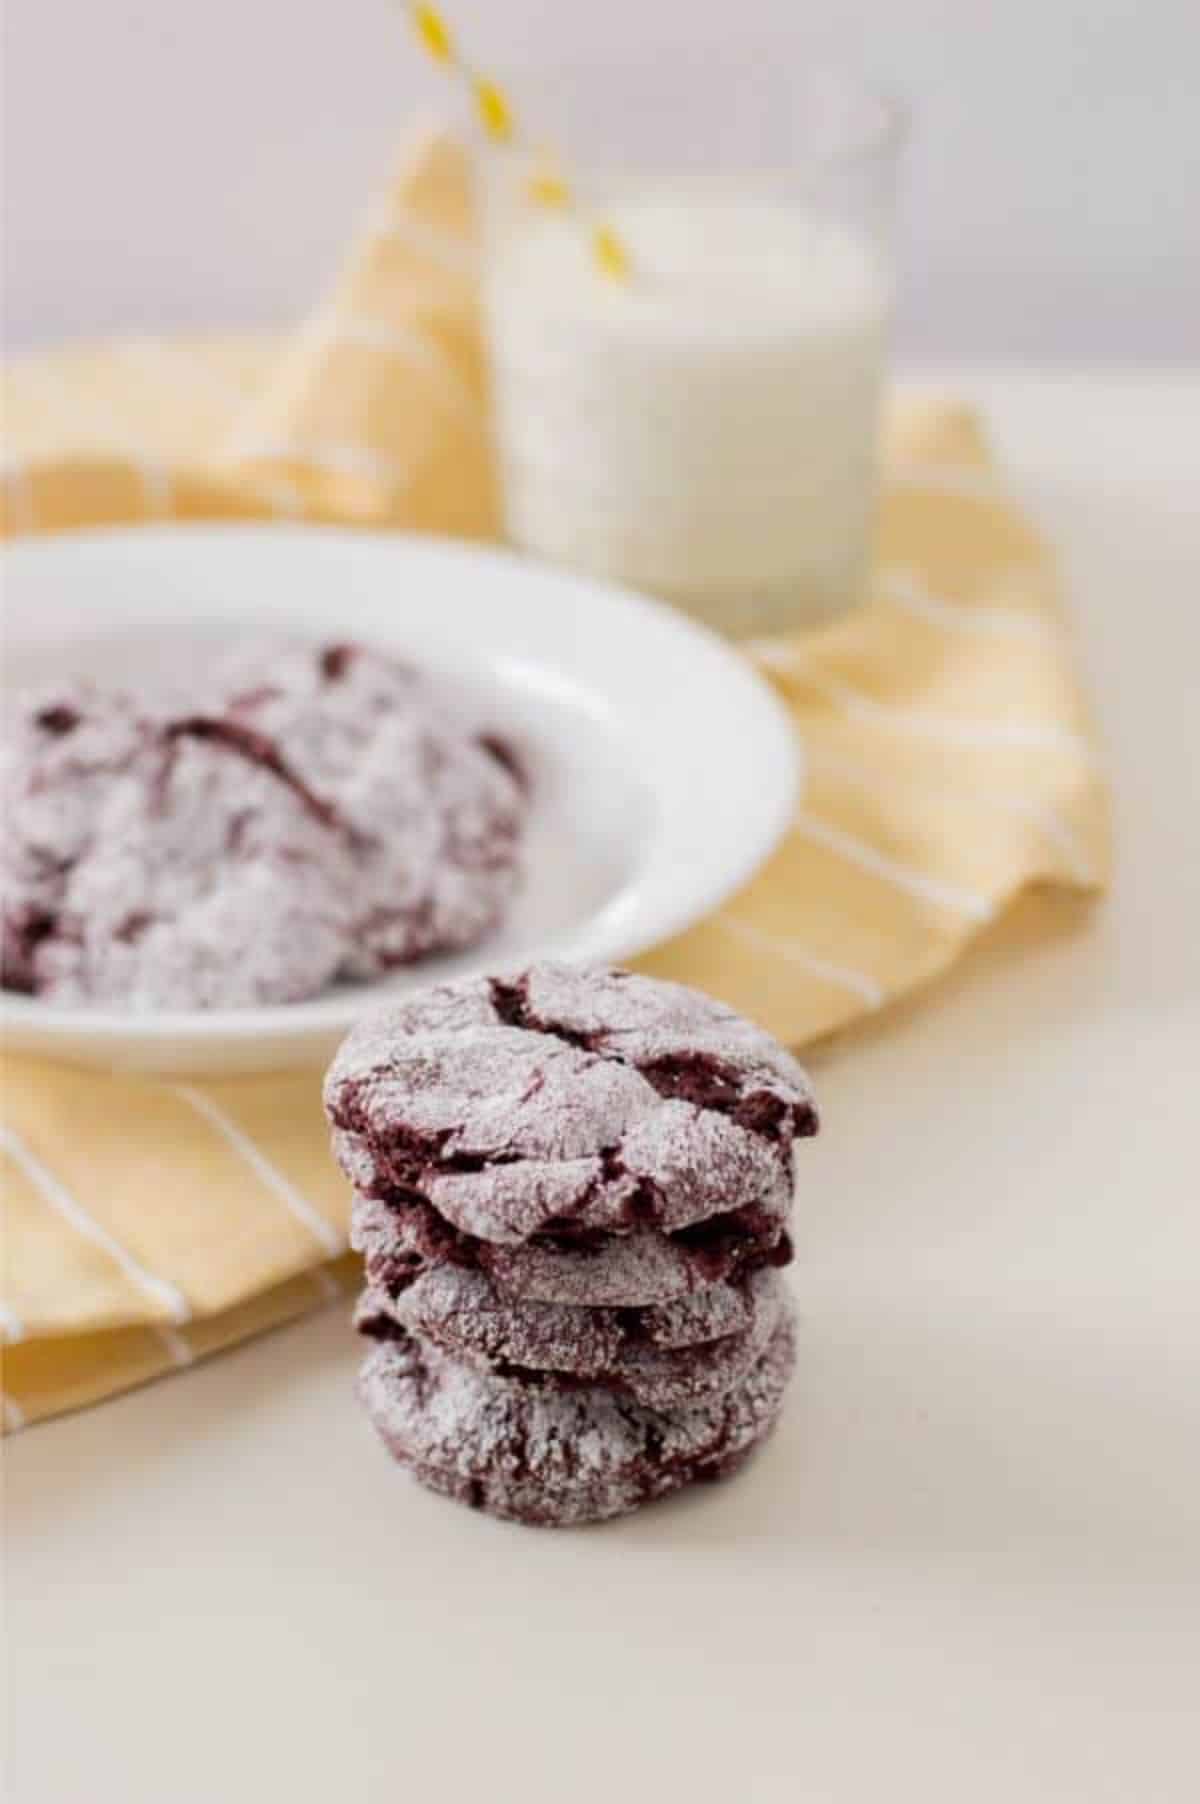 red velvet cookies stacked with more cookies on a white plate in the background on a yellow cloth.